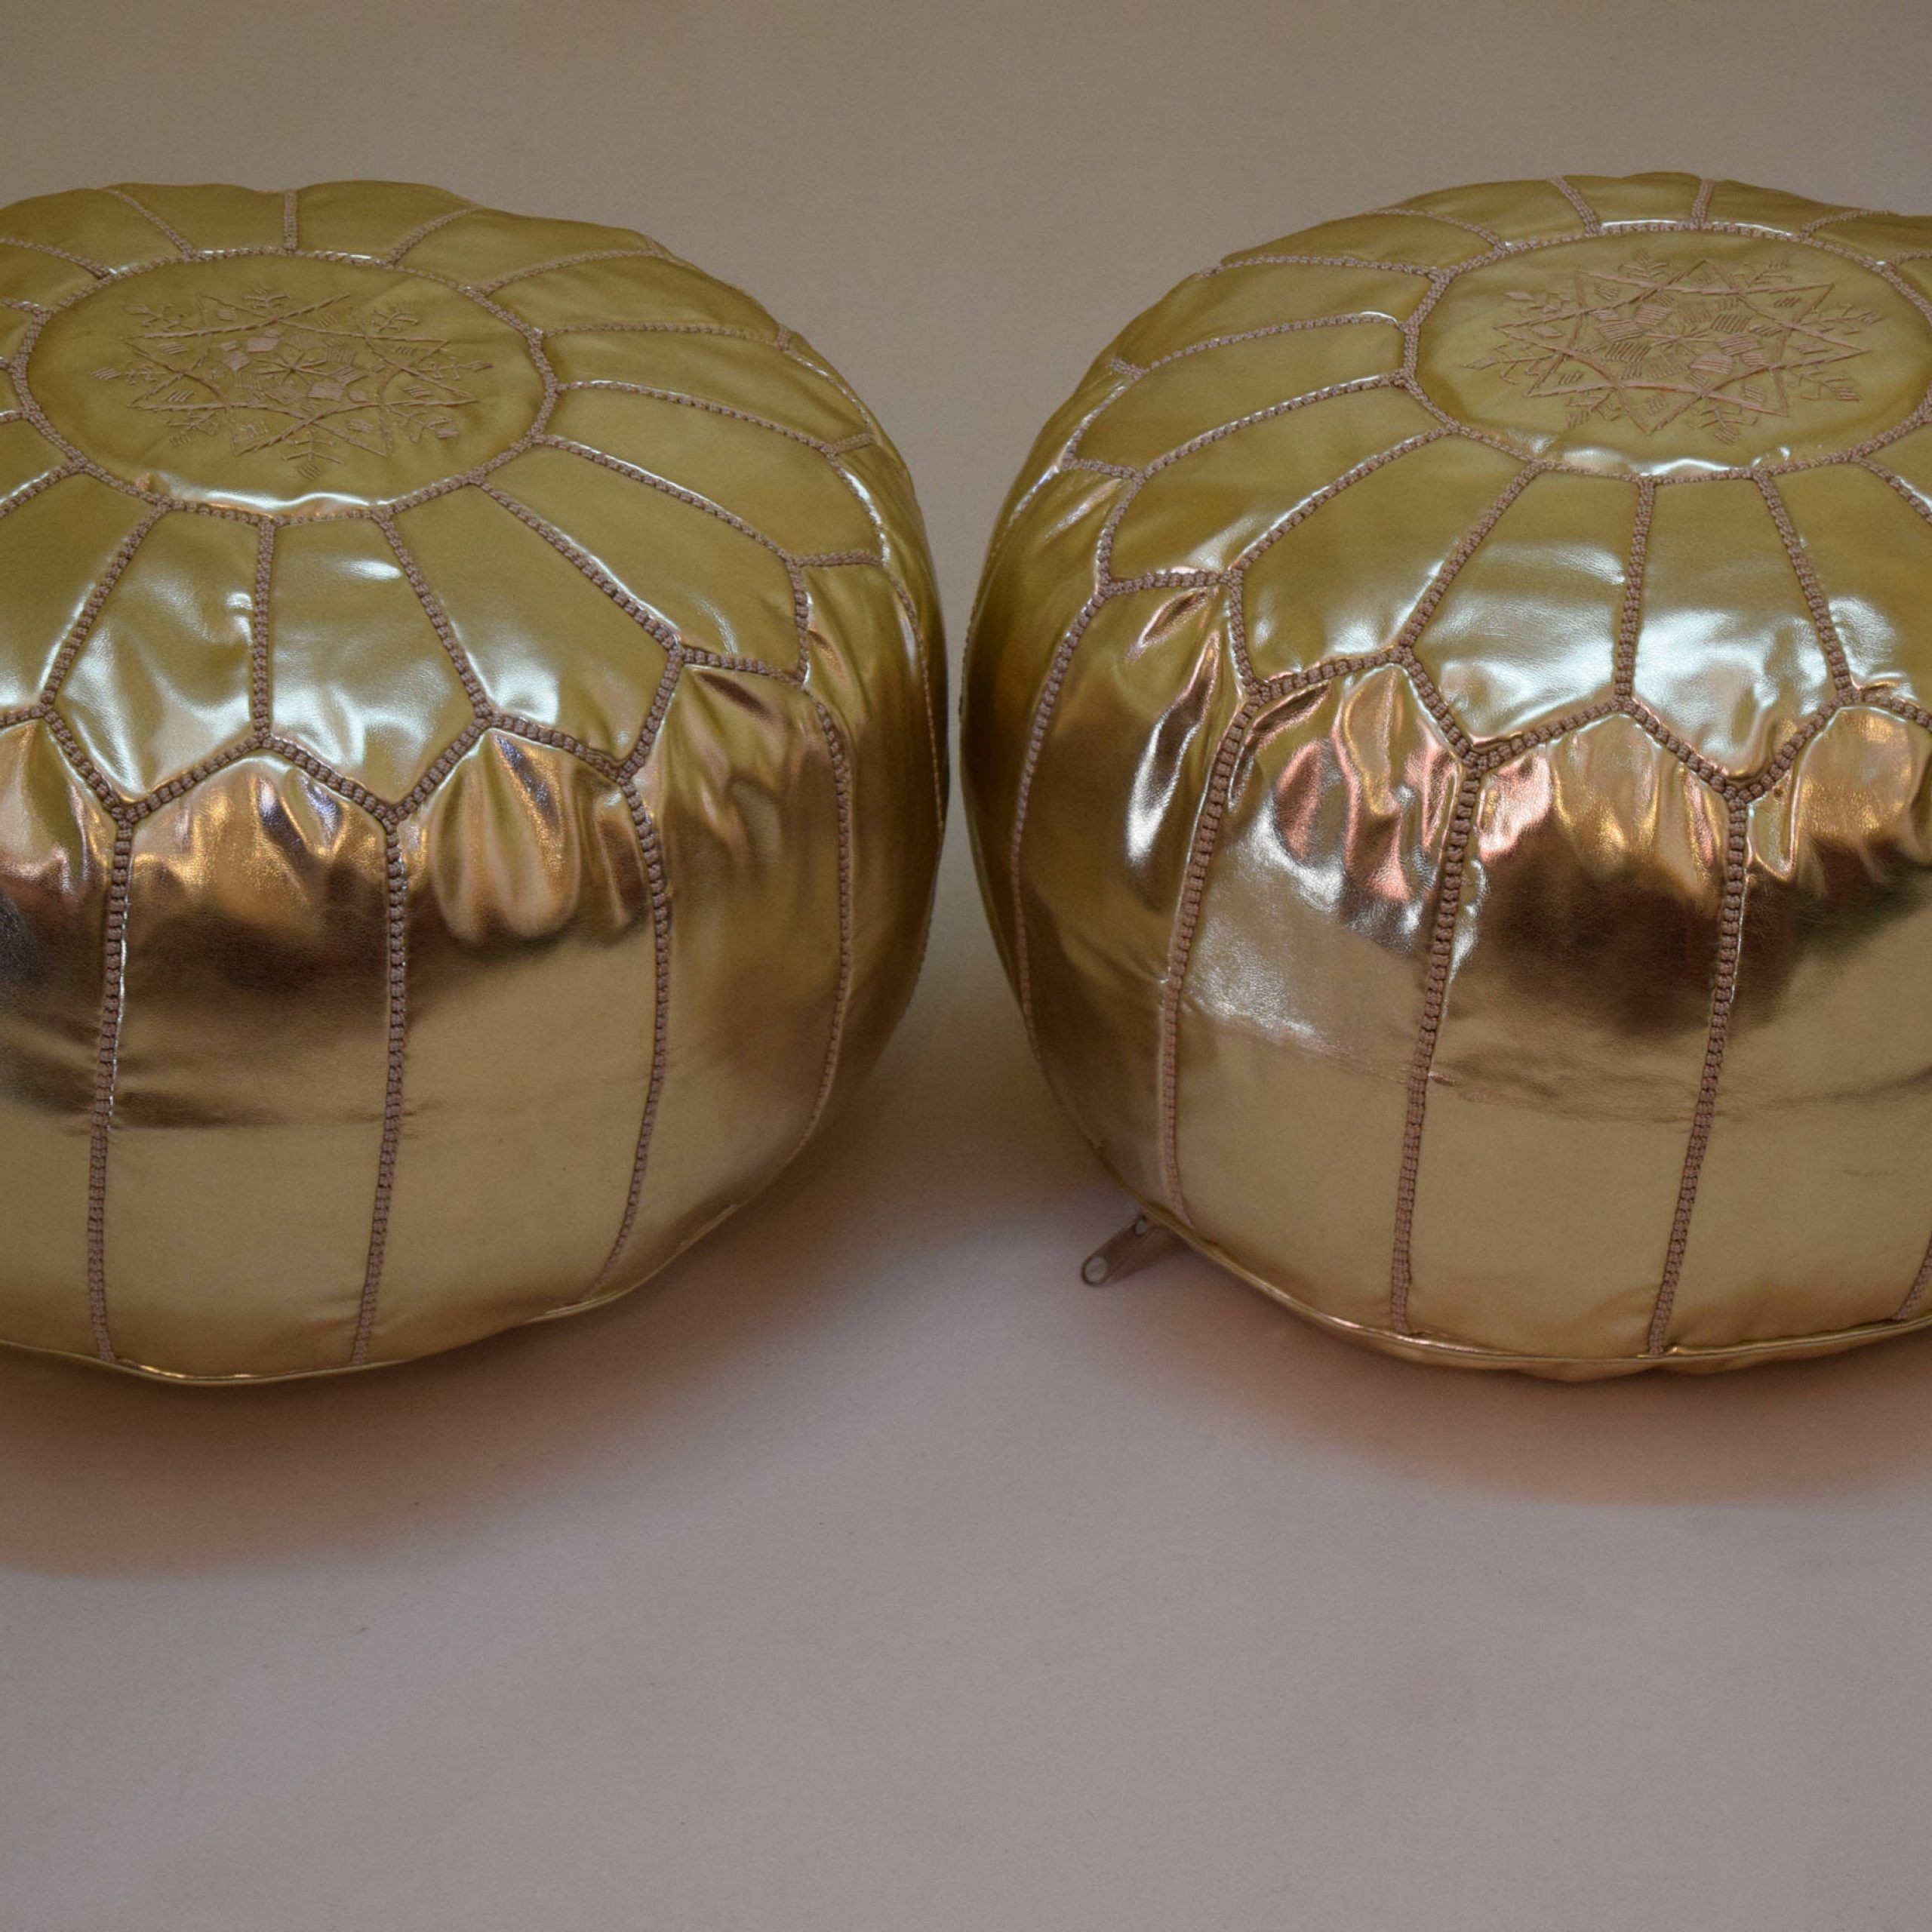 2 Moroccan Faux Leather Gold Poufs Ottoman Floor Round Pouf | Etsy With Gold Faux Leather Ottomans With Pull Tab (View 4 of 20)